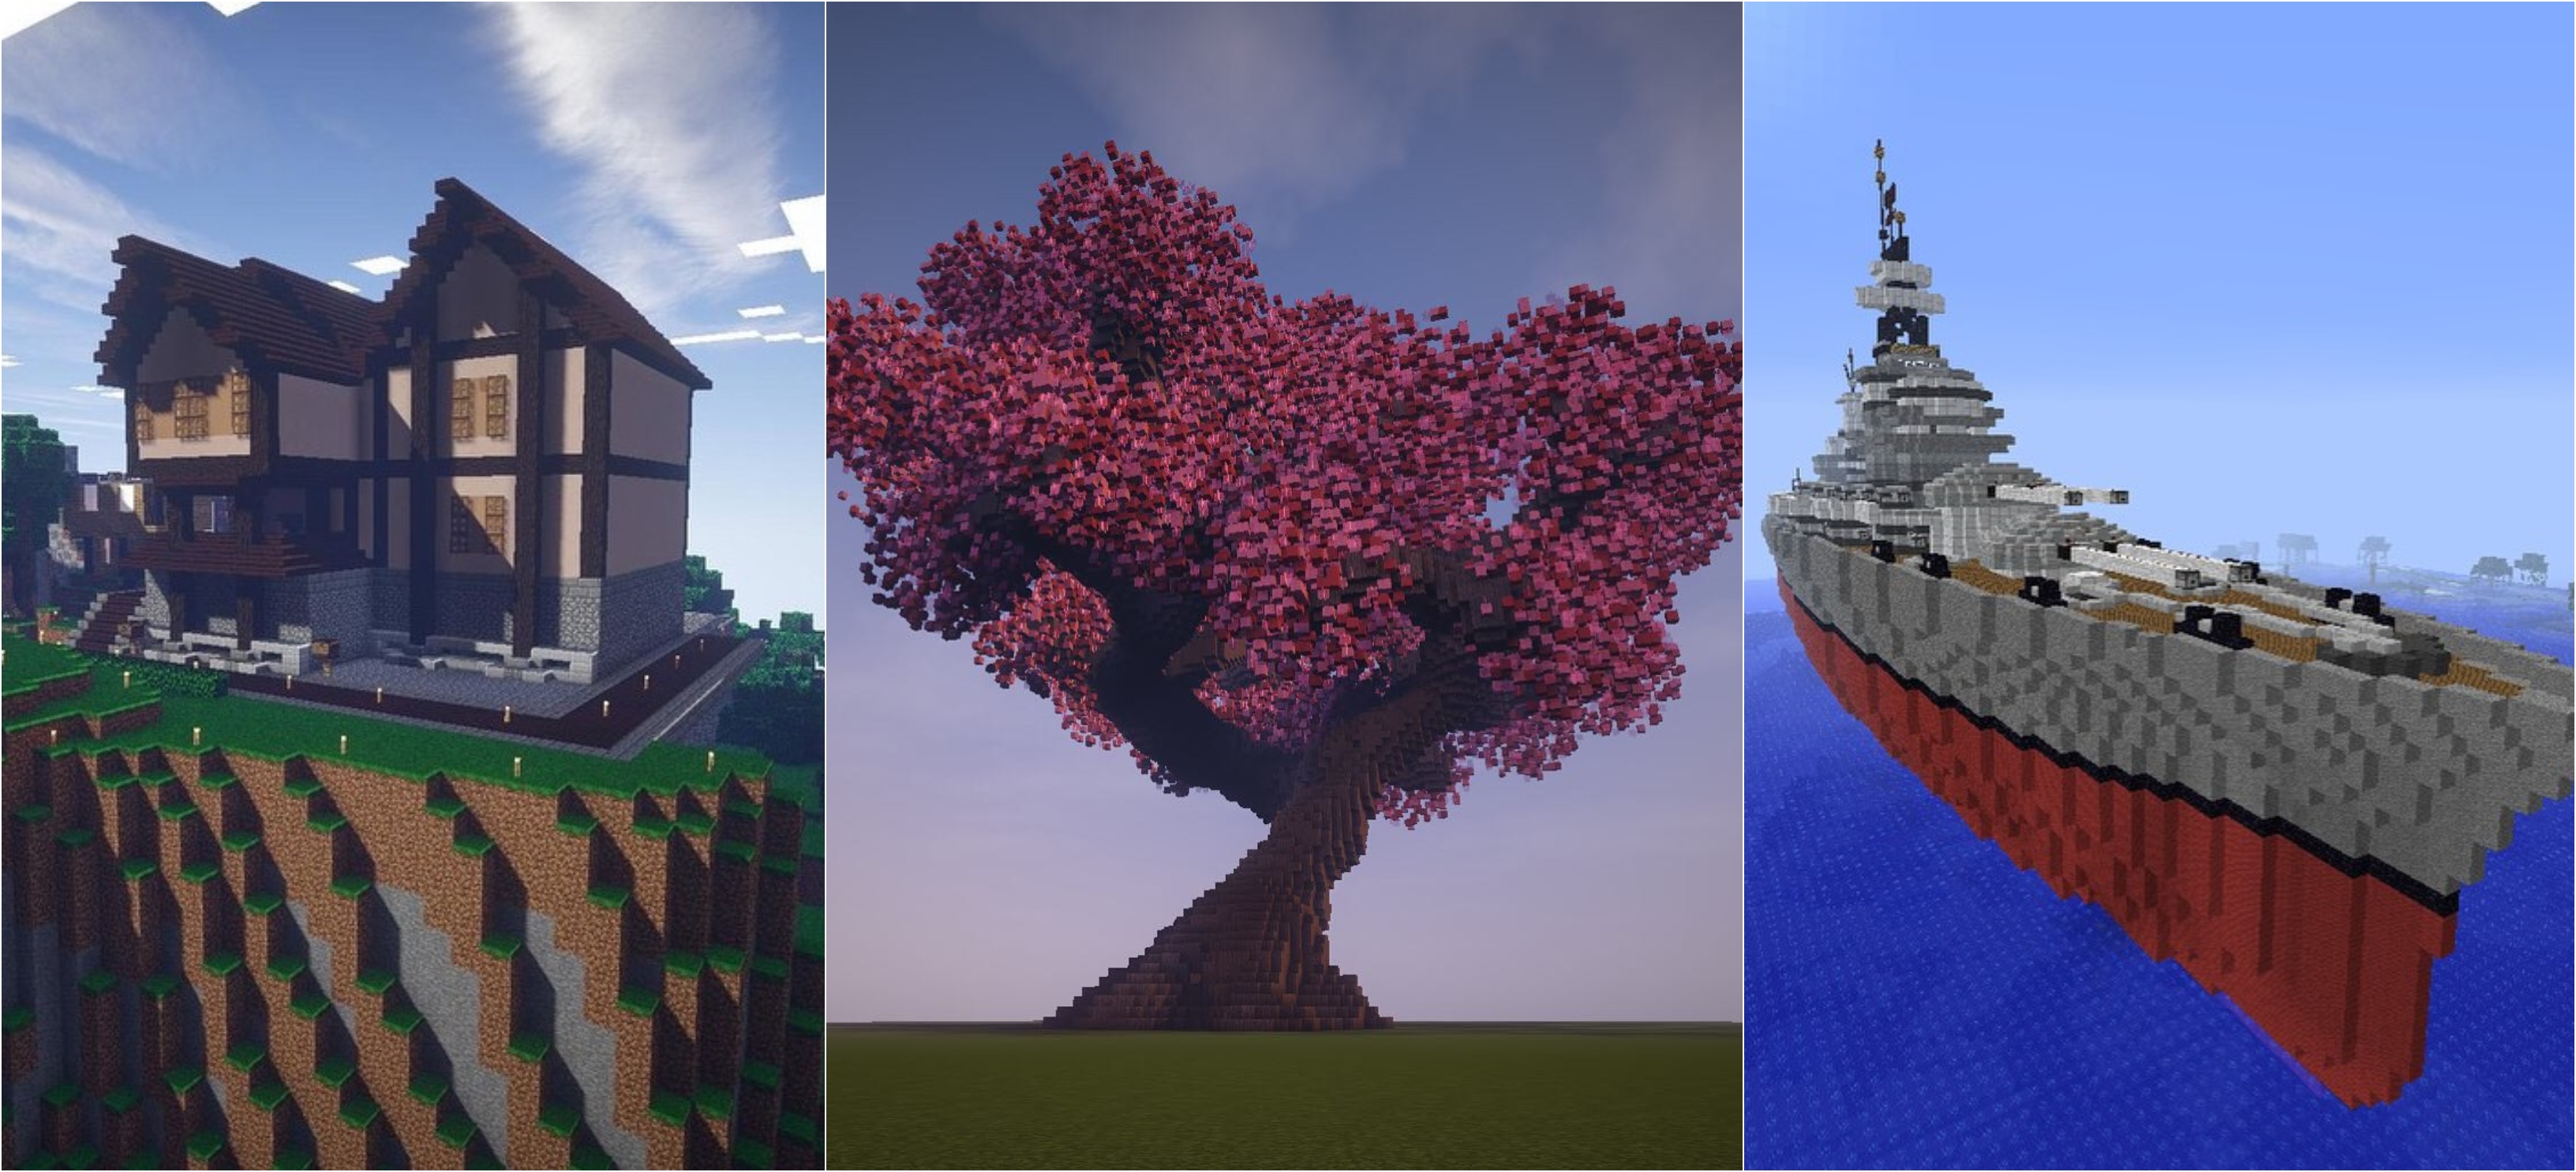 Creative Things To Build In Minecraft 20 Fun Ideas That You Will Love Check out some of the funniest and weirdest minecraft mods ever created. creative things to build in minecraft